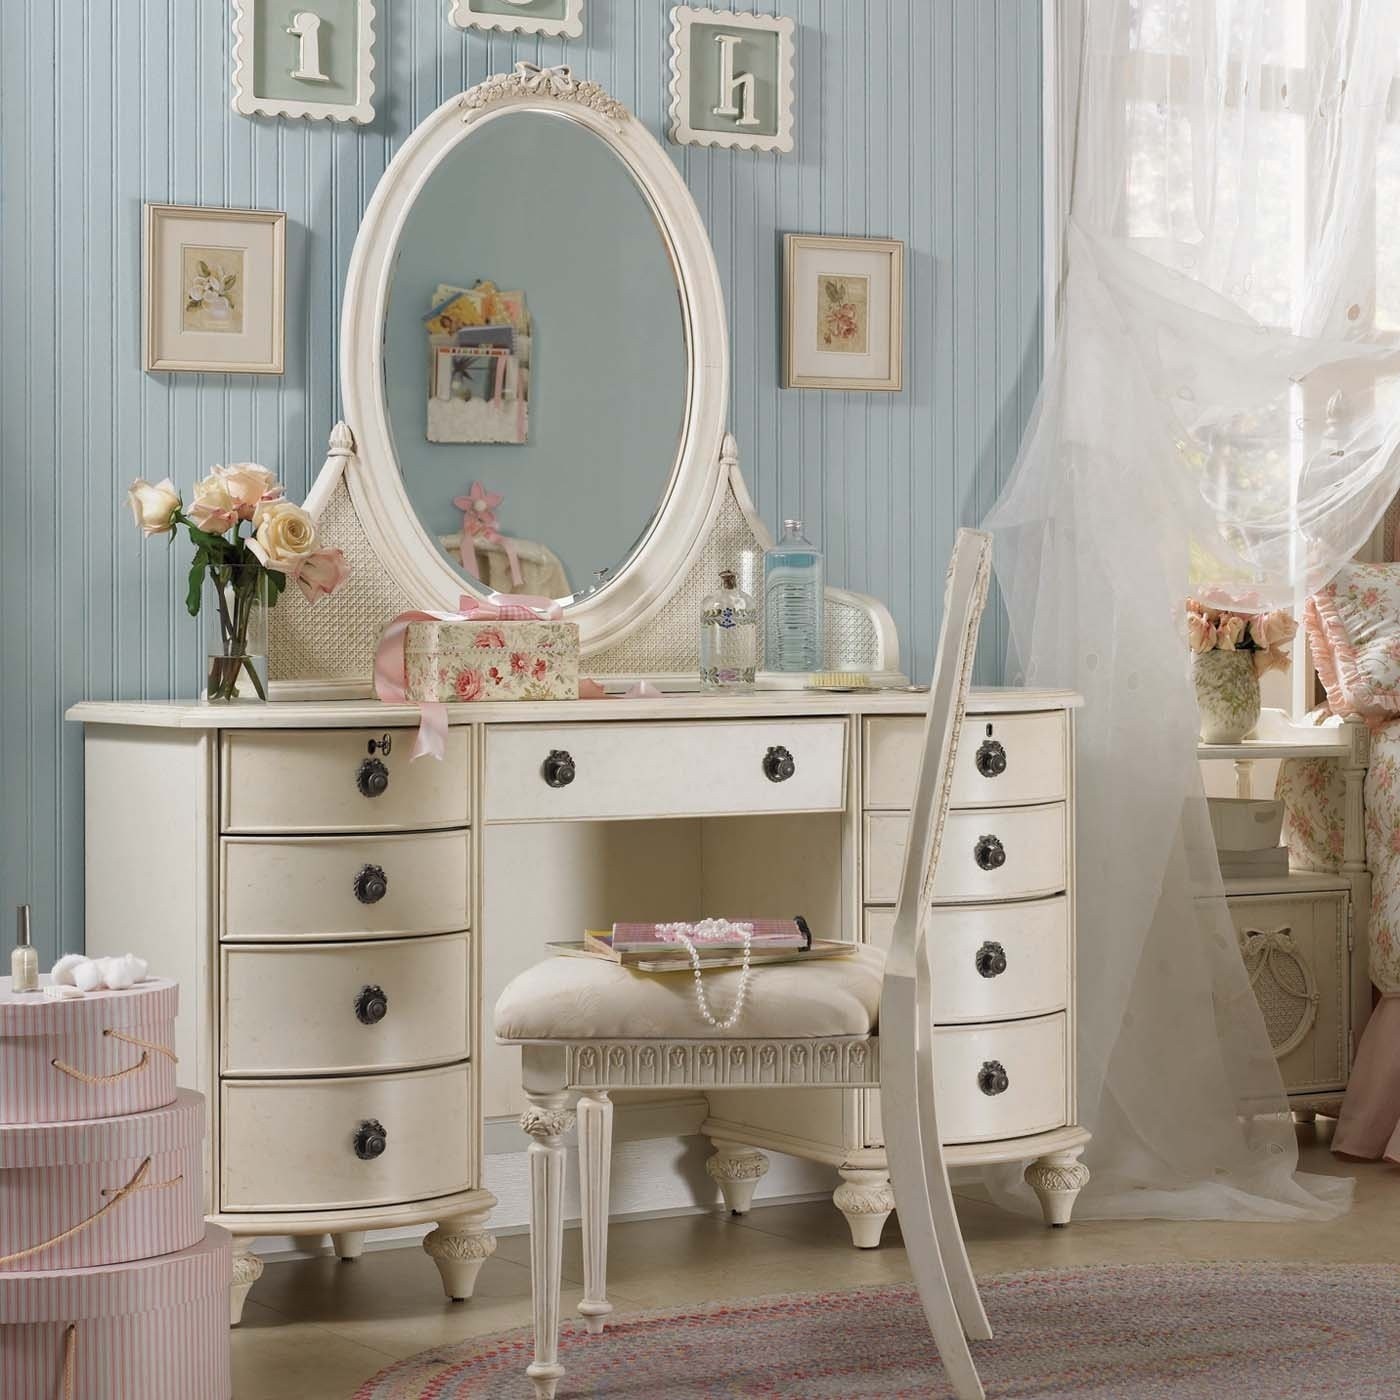 The bedroom vanity and vanity tops discussed in this article